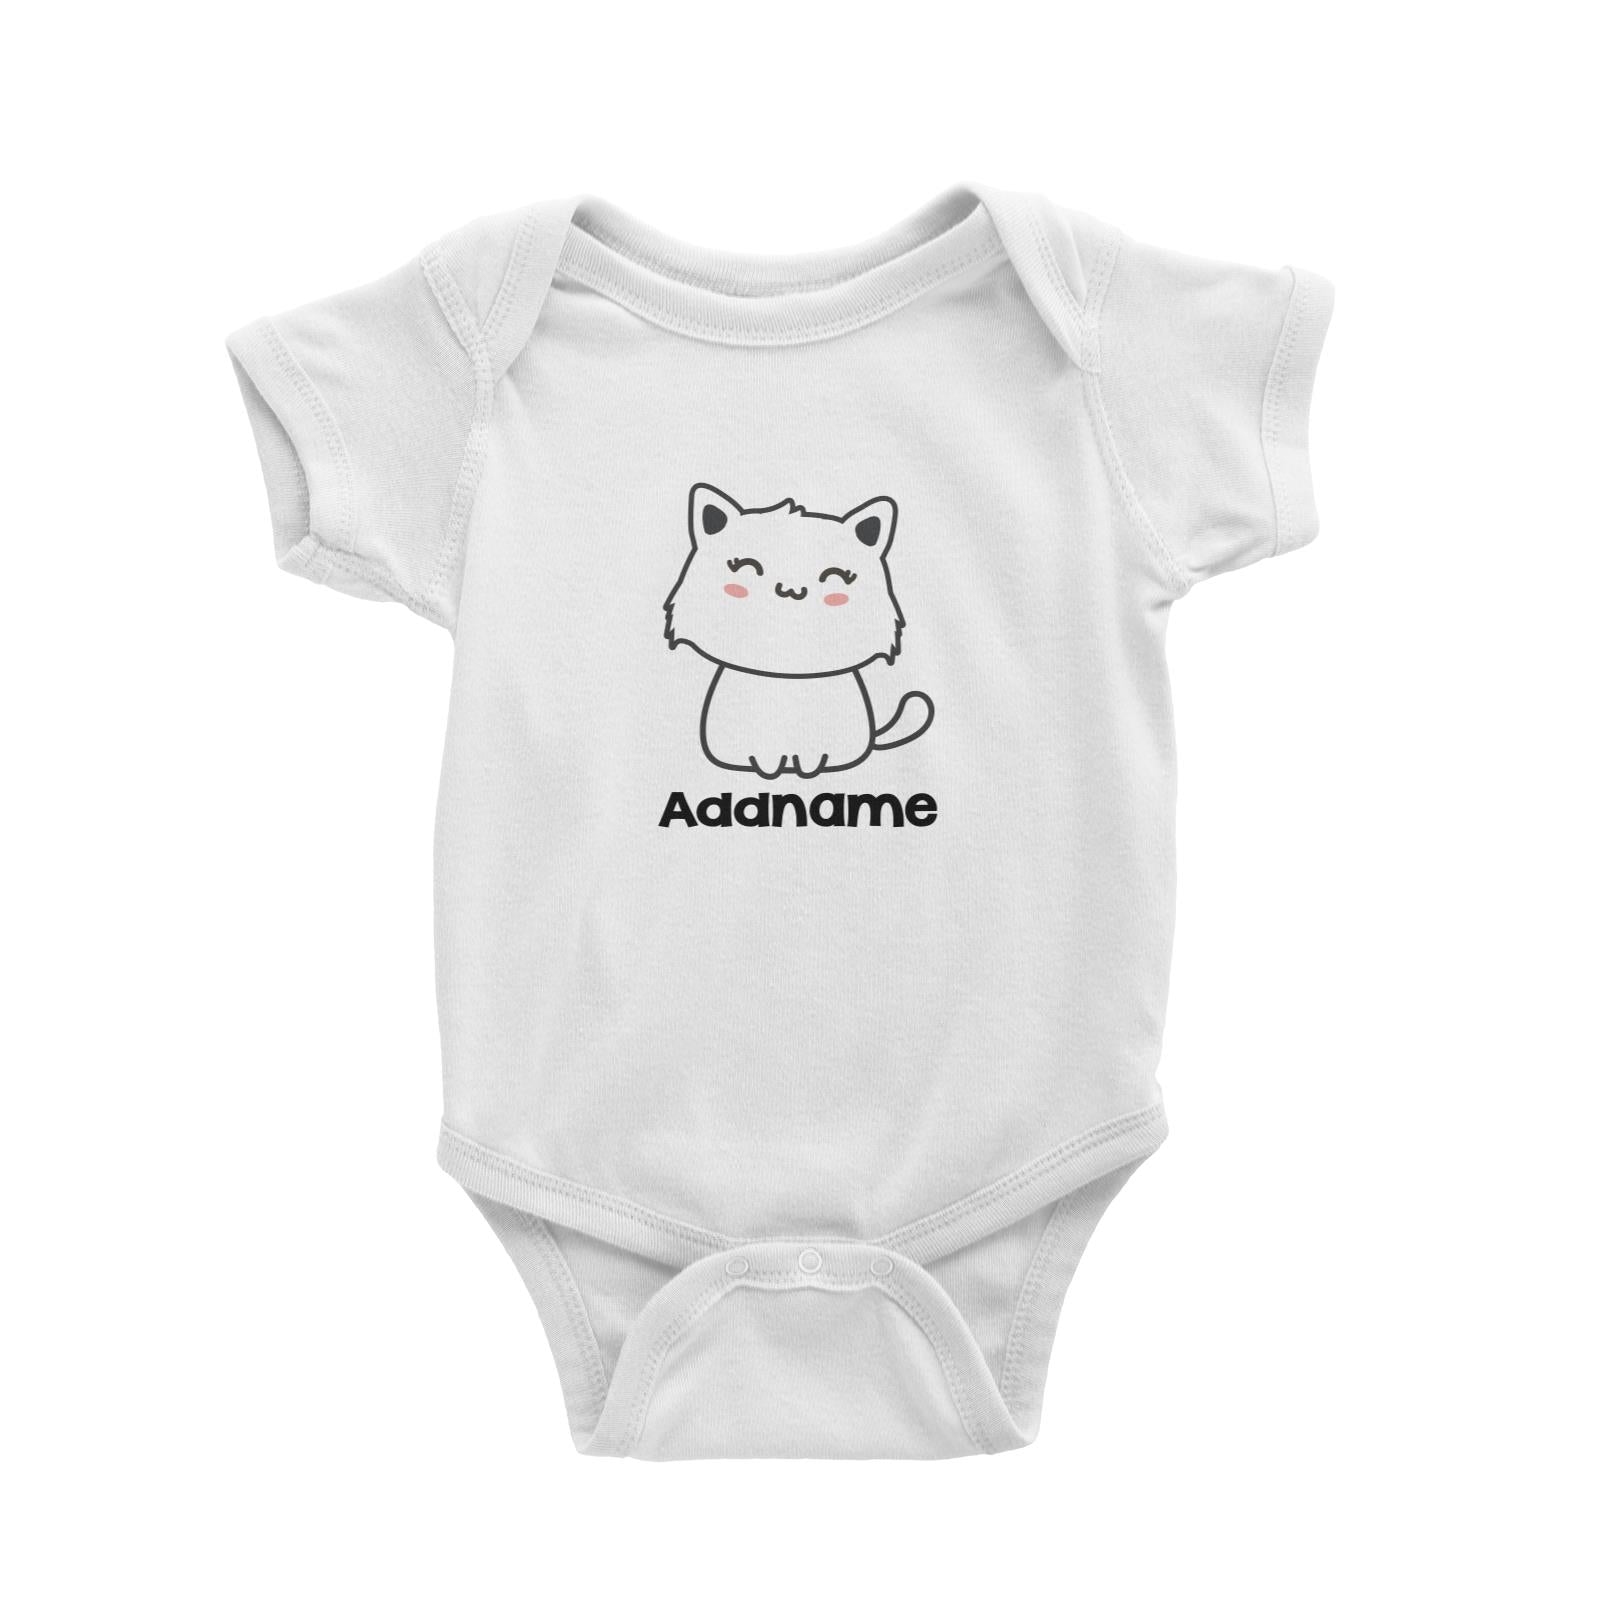 Drawn Adorable Cats White Addname Baby Romper